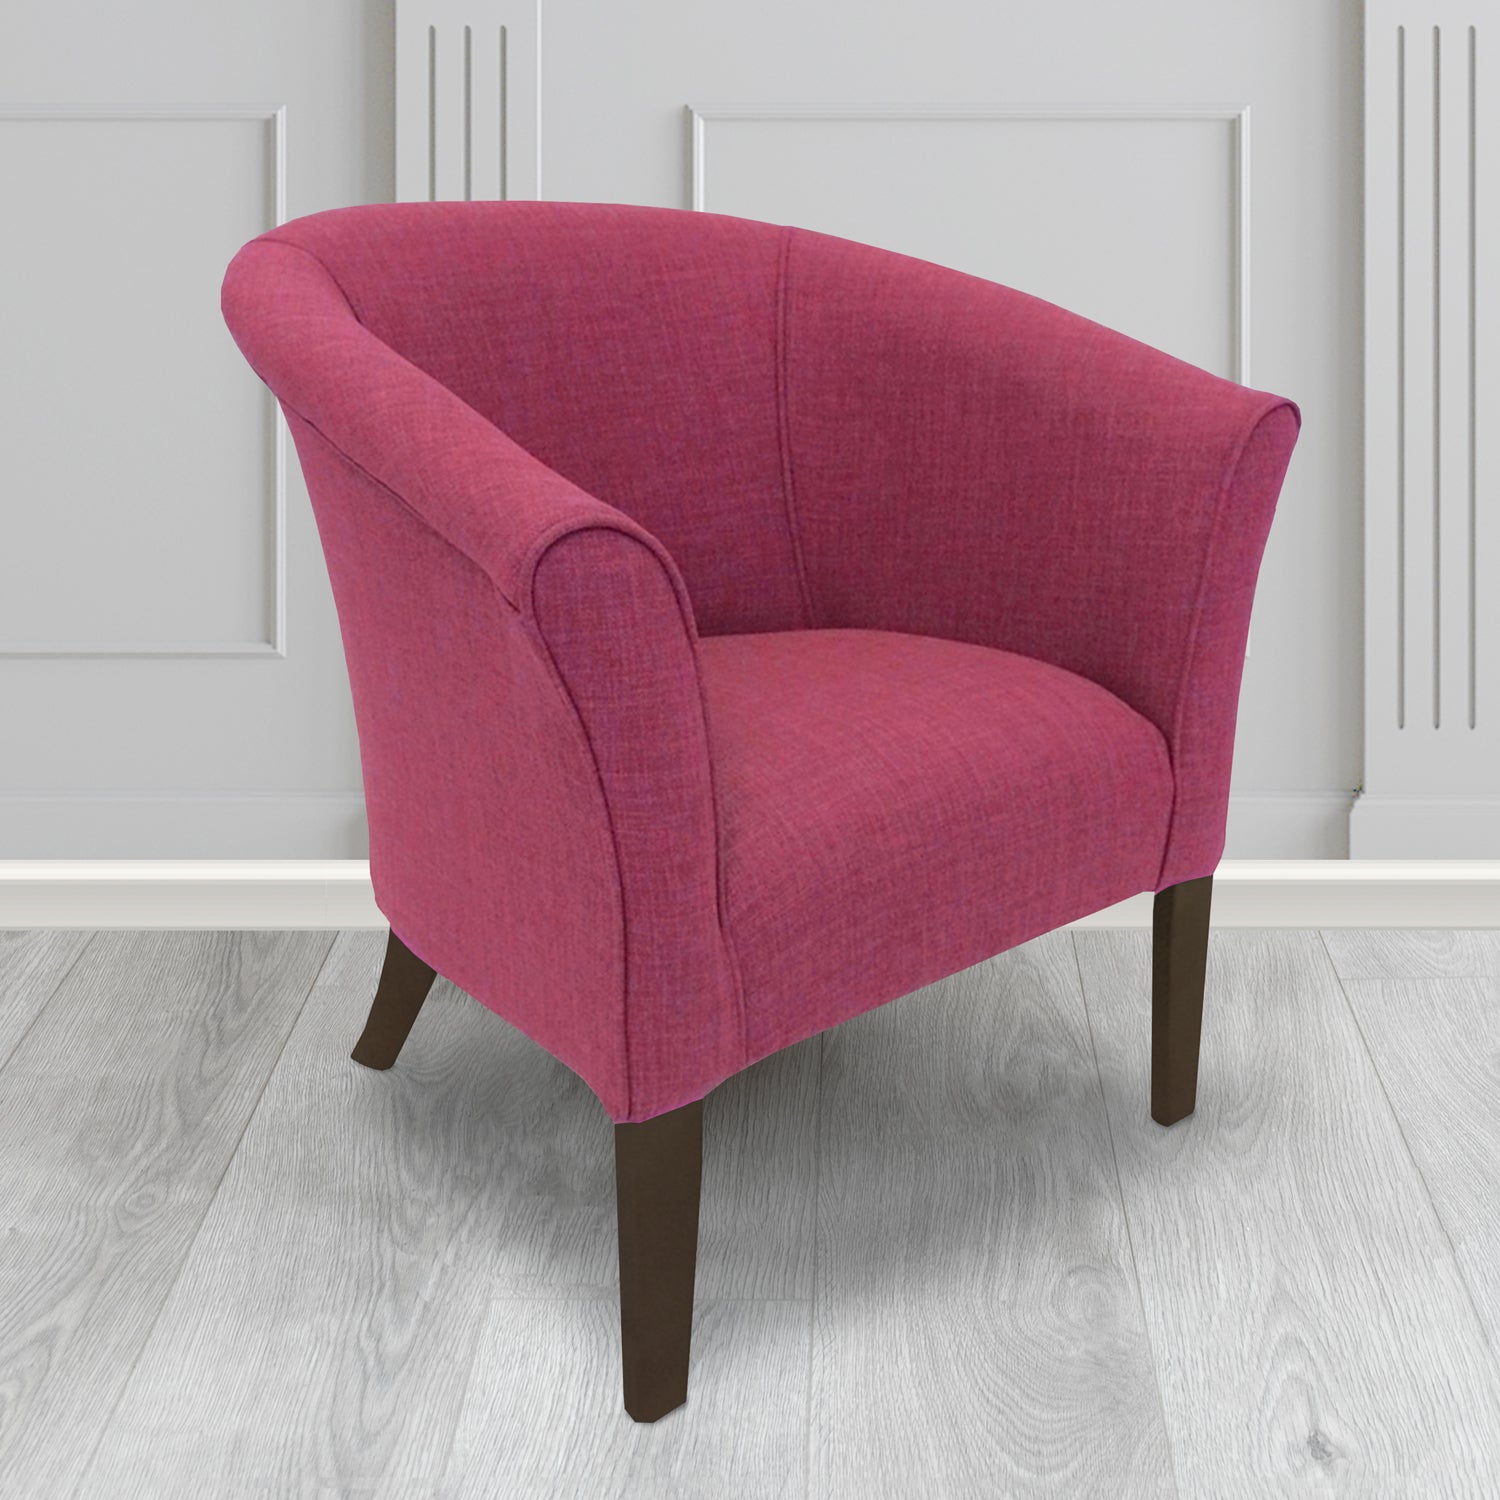 Quill Tub Chair in Linetta Orchid Crib 5 Plain Fabric - Antimicrobial, Stain Resistant & Waterproof - The Tub Chair Shop